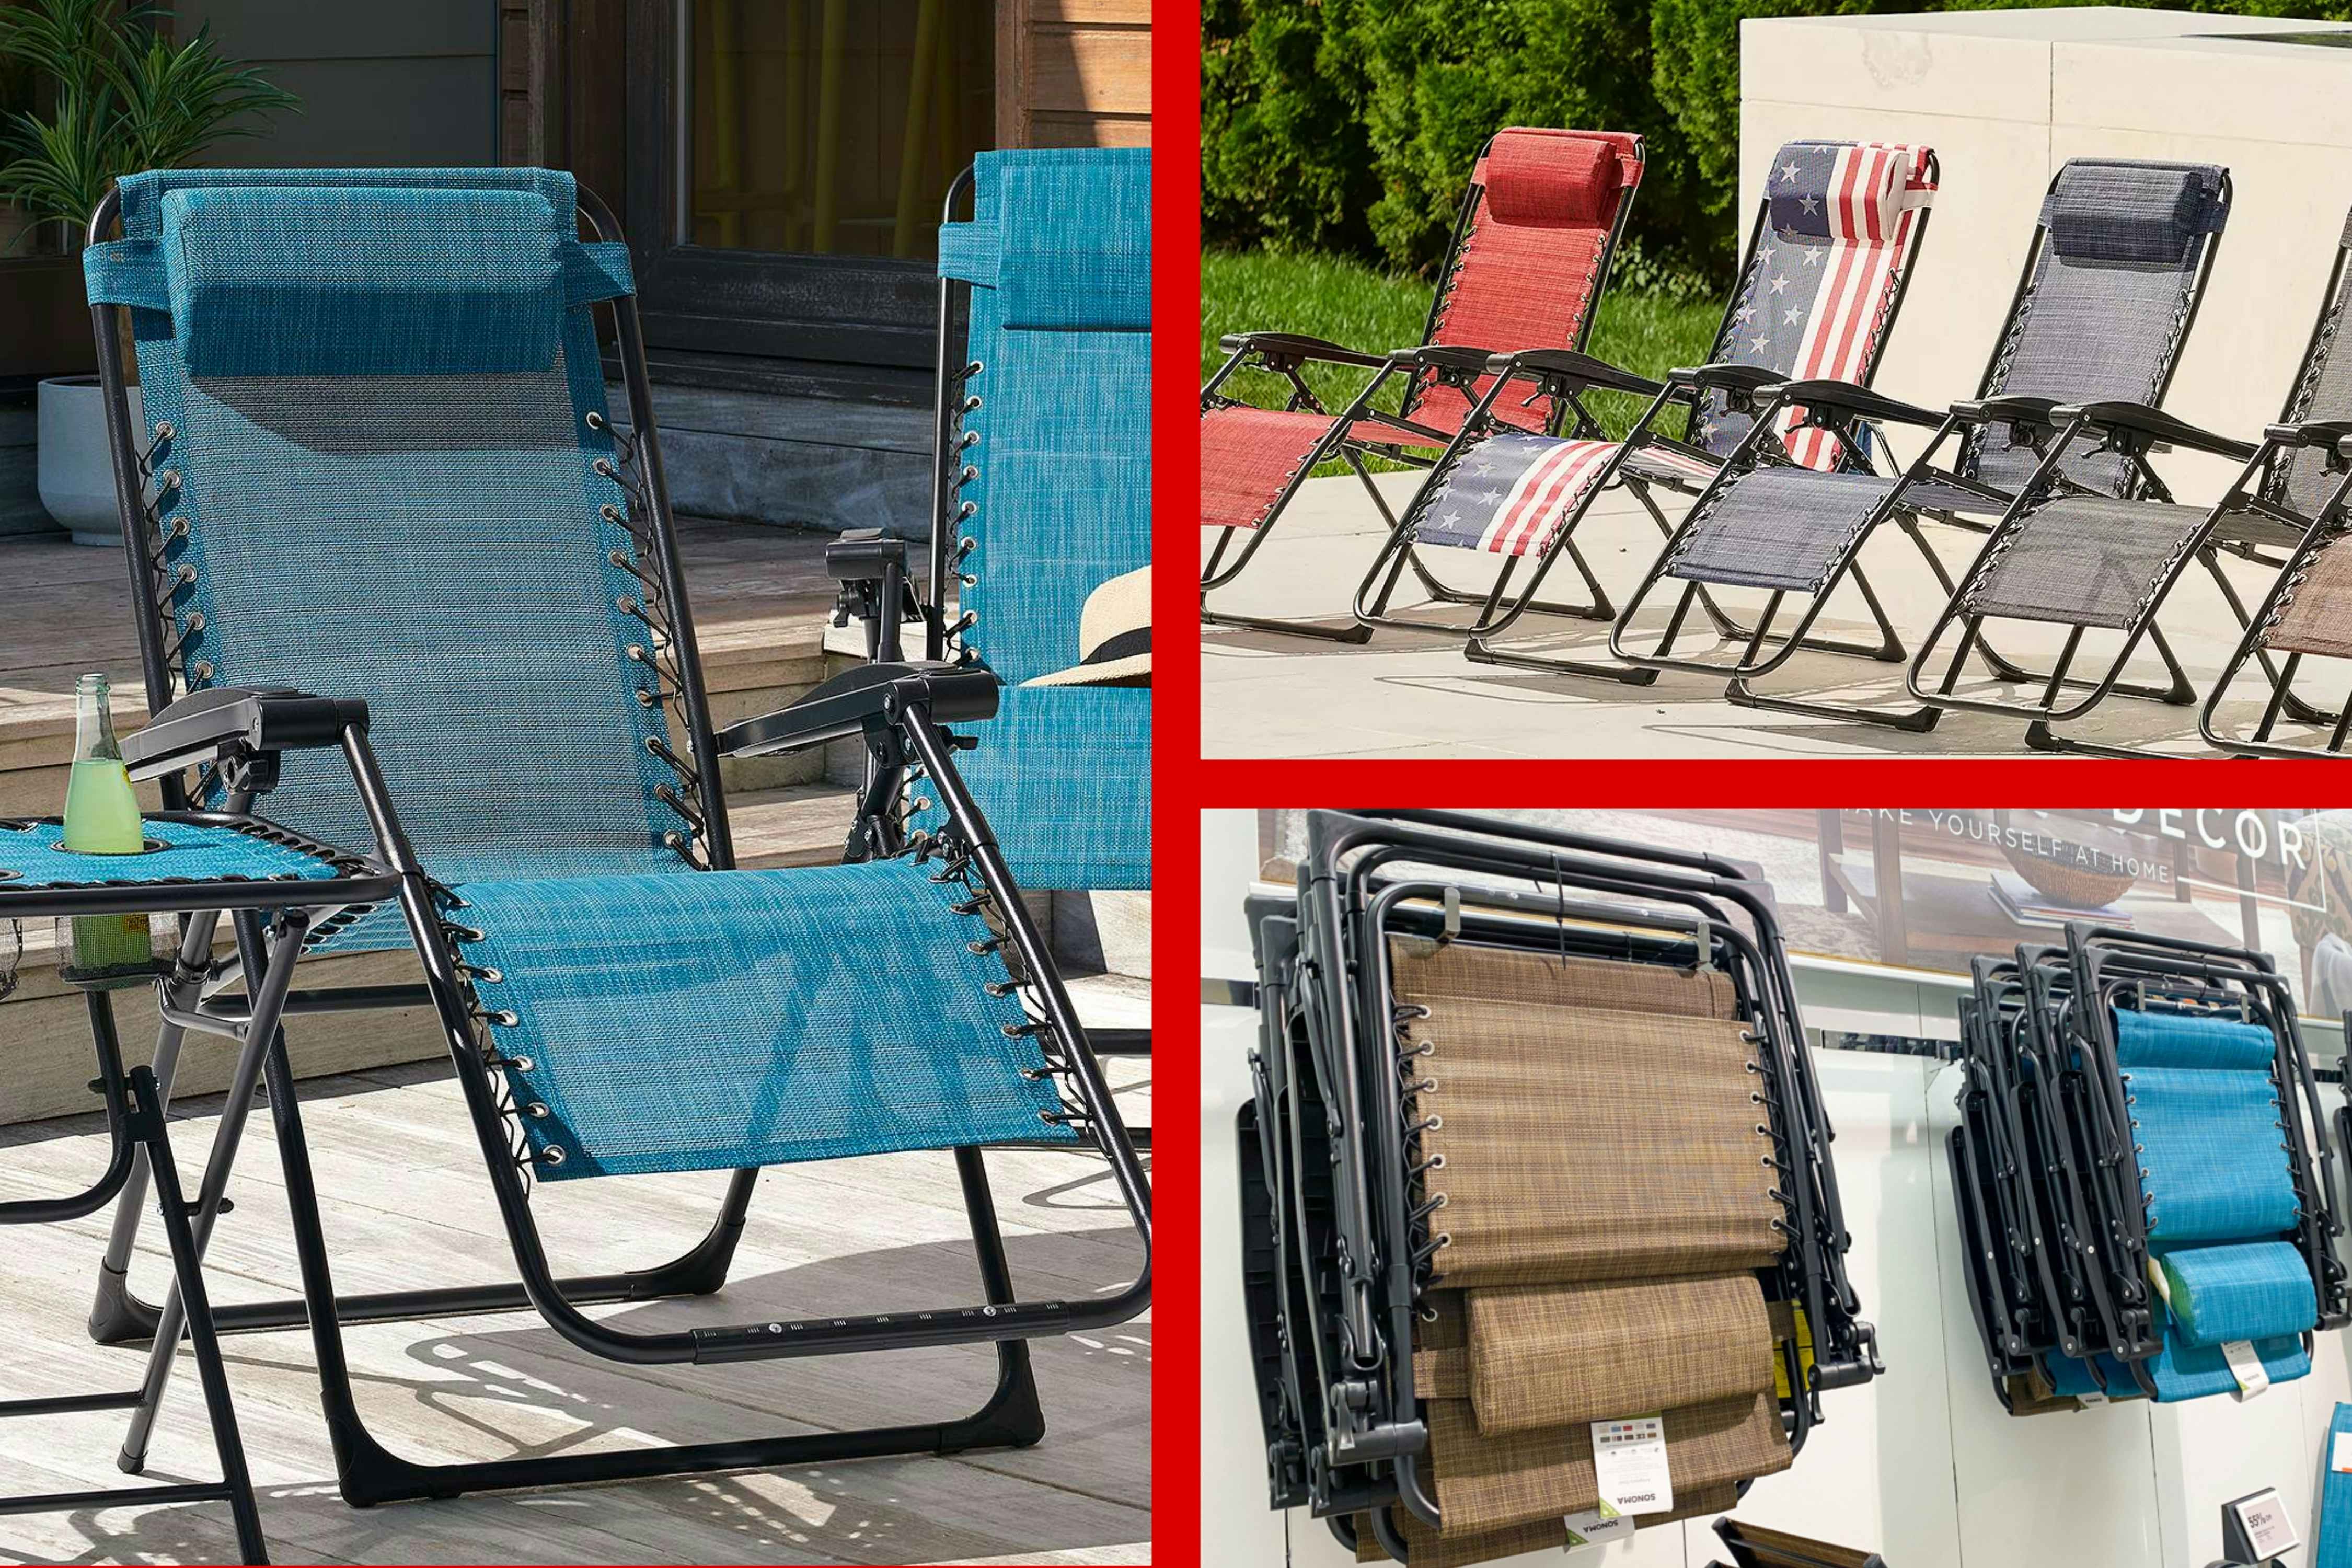 Score 2 Anti-Gravity Chairs for $37 at Kohl's — Best Price Ever ($18.49 Each)